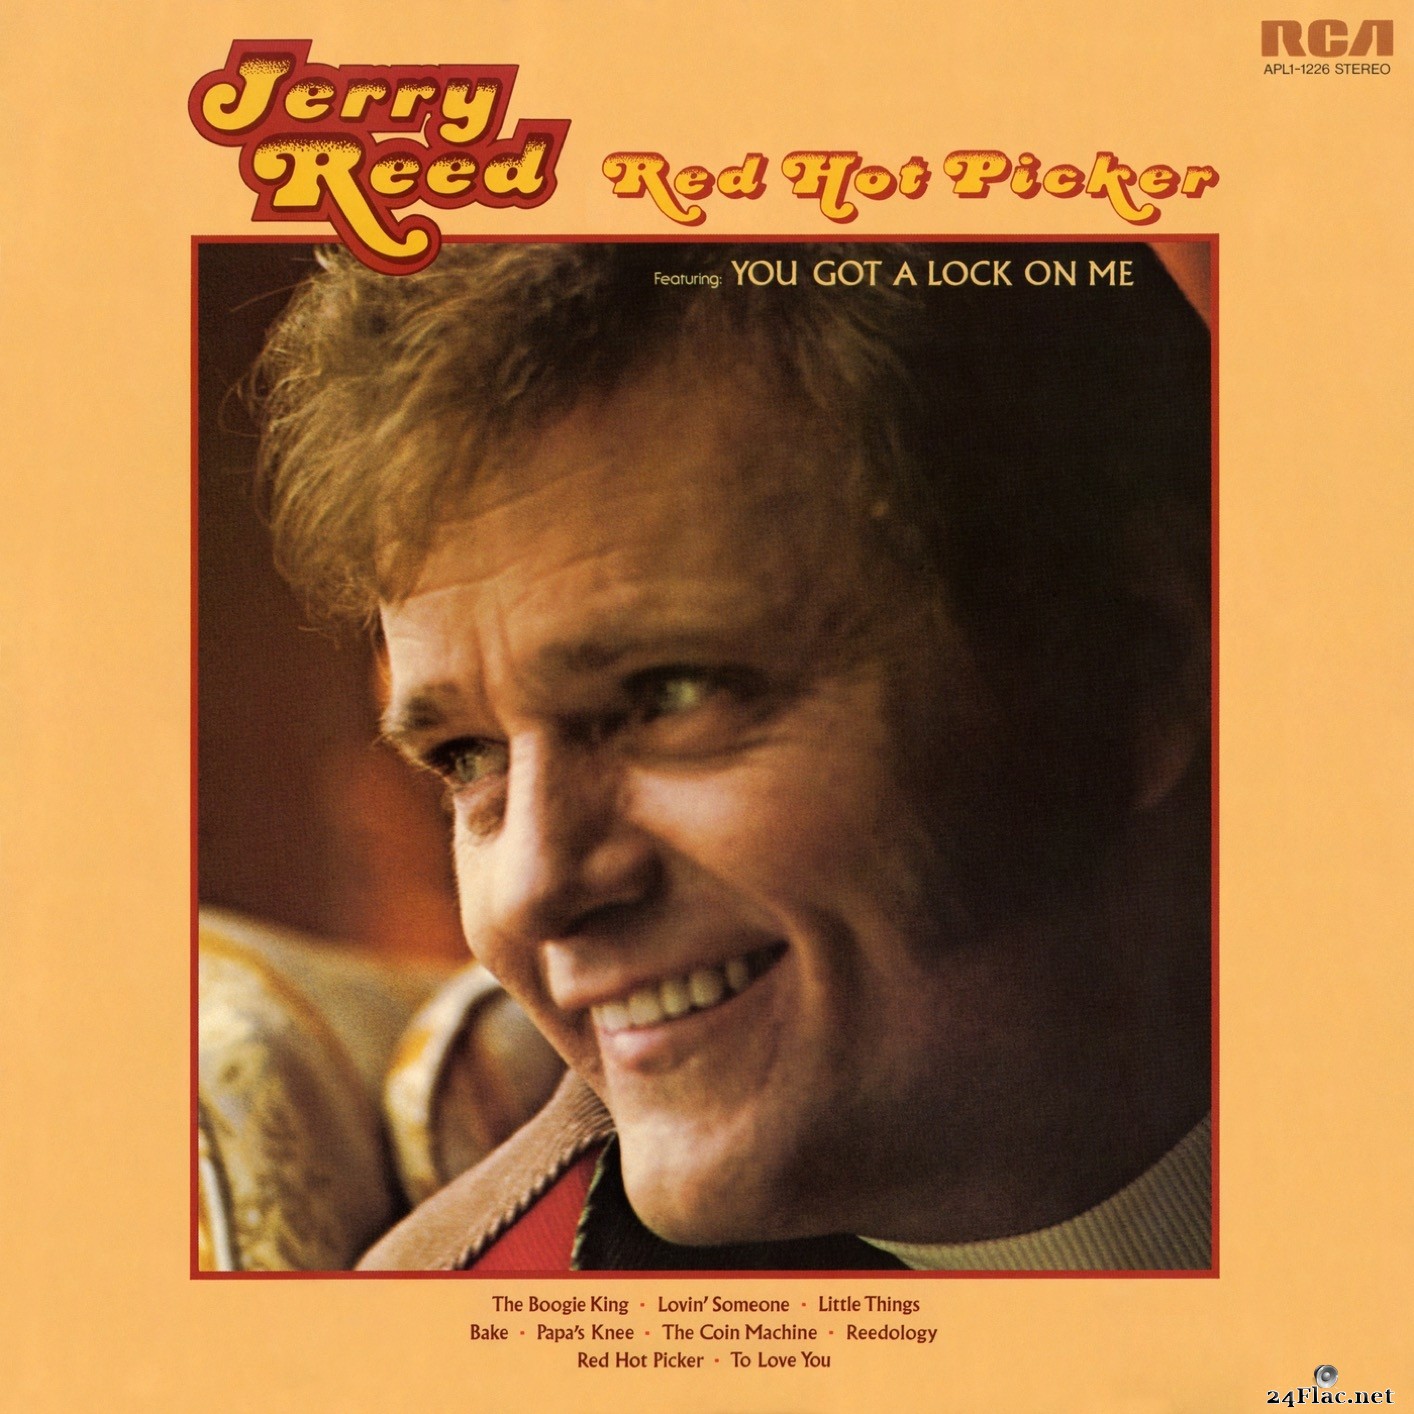 Jerry Reed - Red Hot Picker (2019) Hi-Res